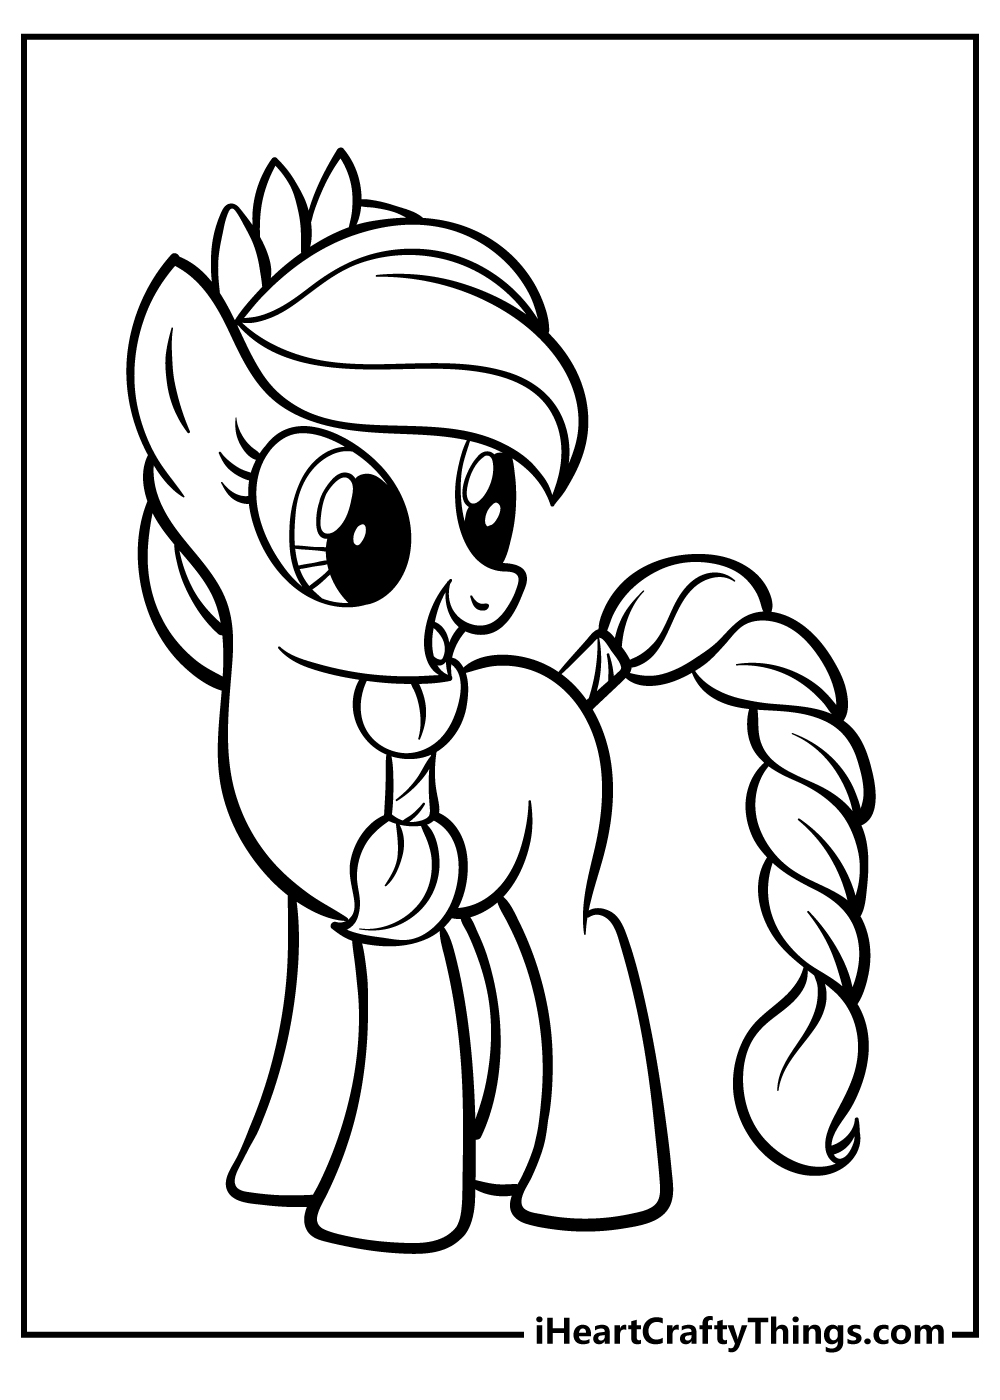 Printable Rainbow Dash Coloring Pages Updated 21